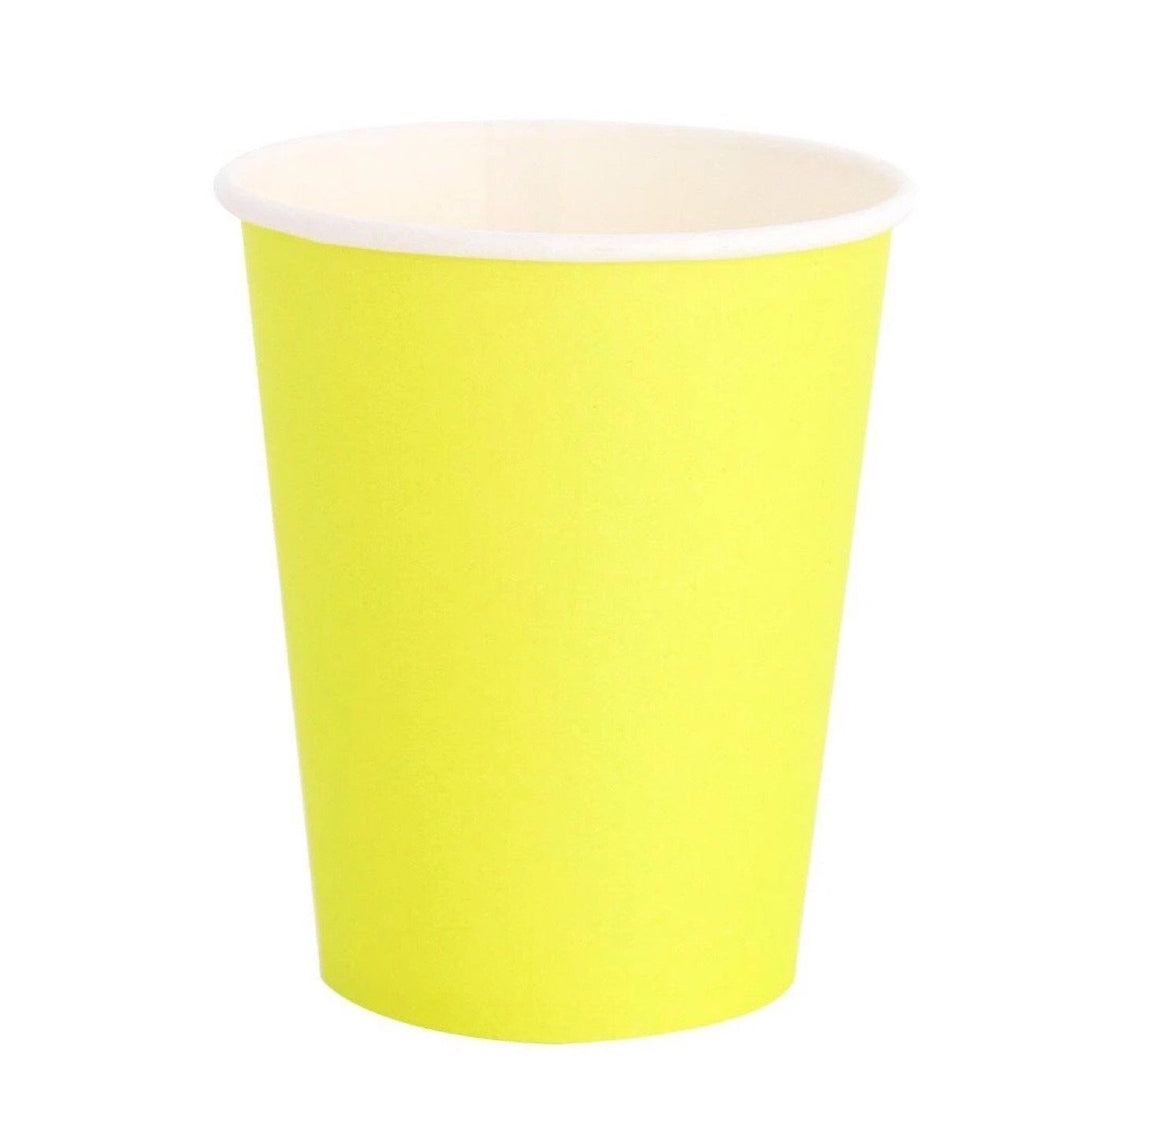 CUPS - YELLOW CHARTREUSE OH HAPPY DAY